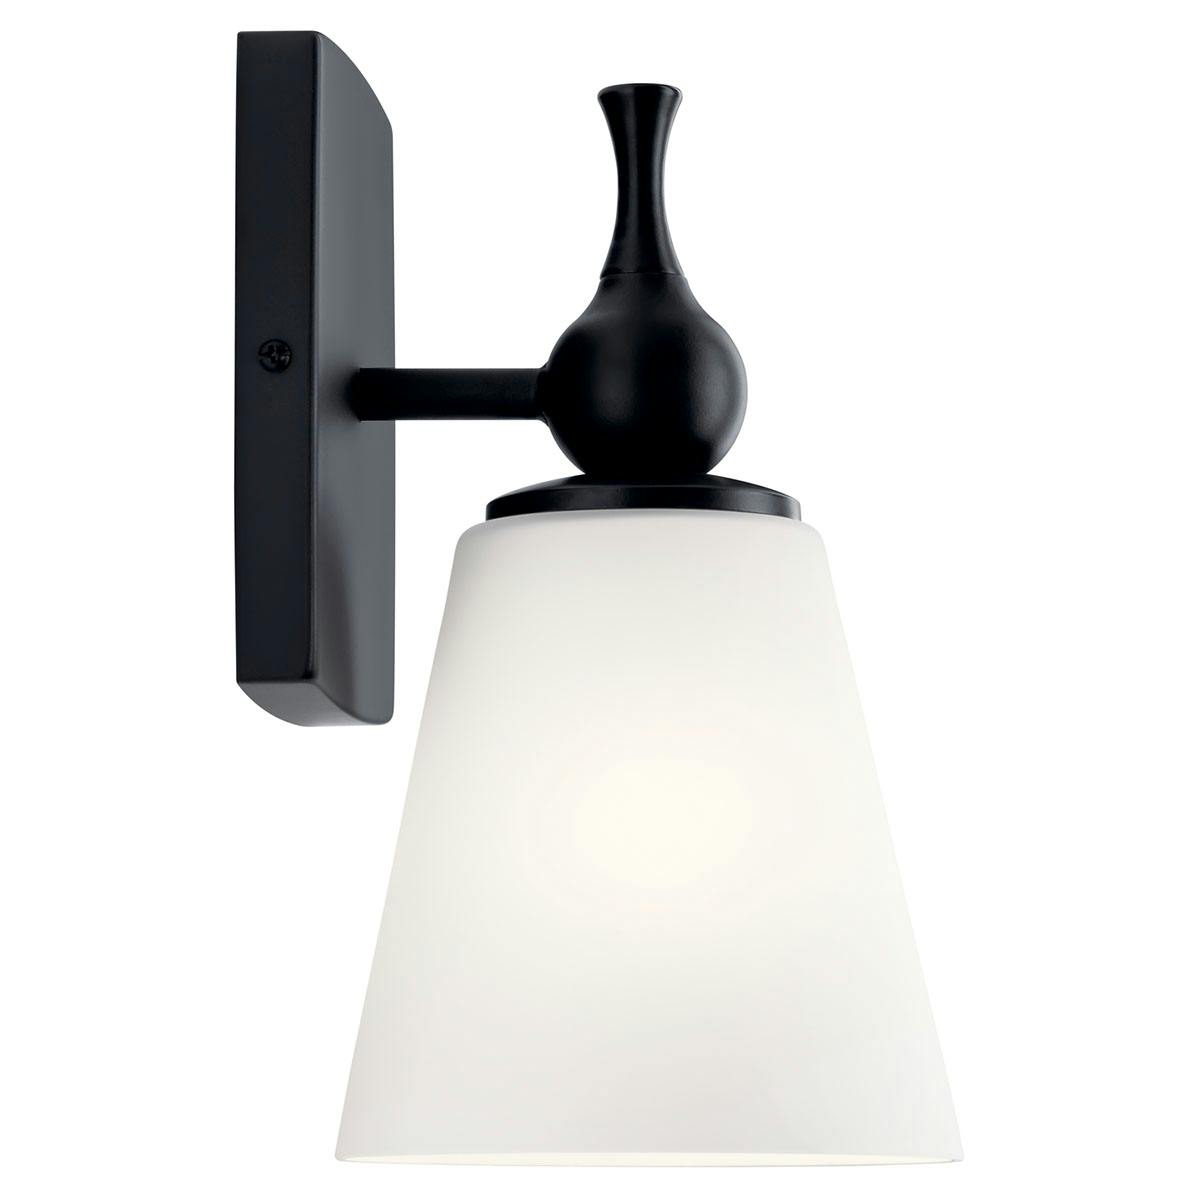 Profile view of the Cosabella 6" Sconce in a Black finish on a white background